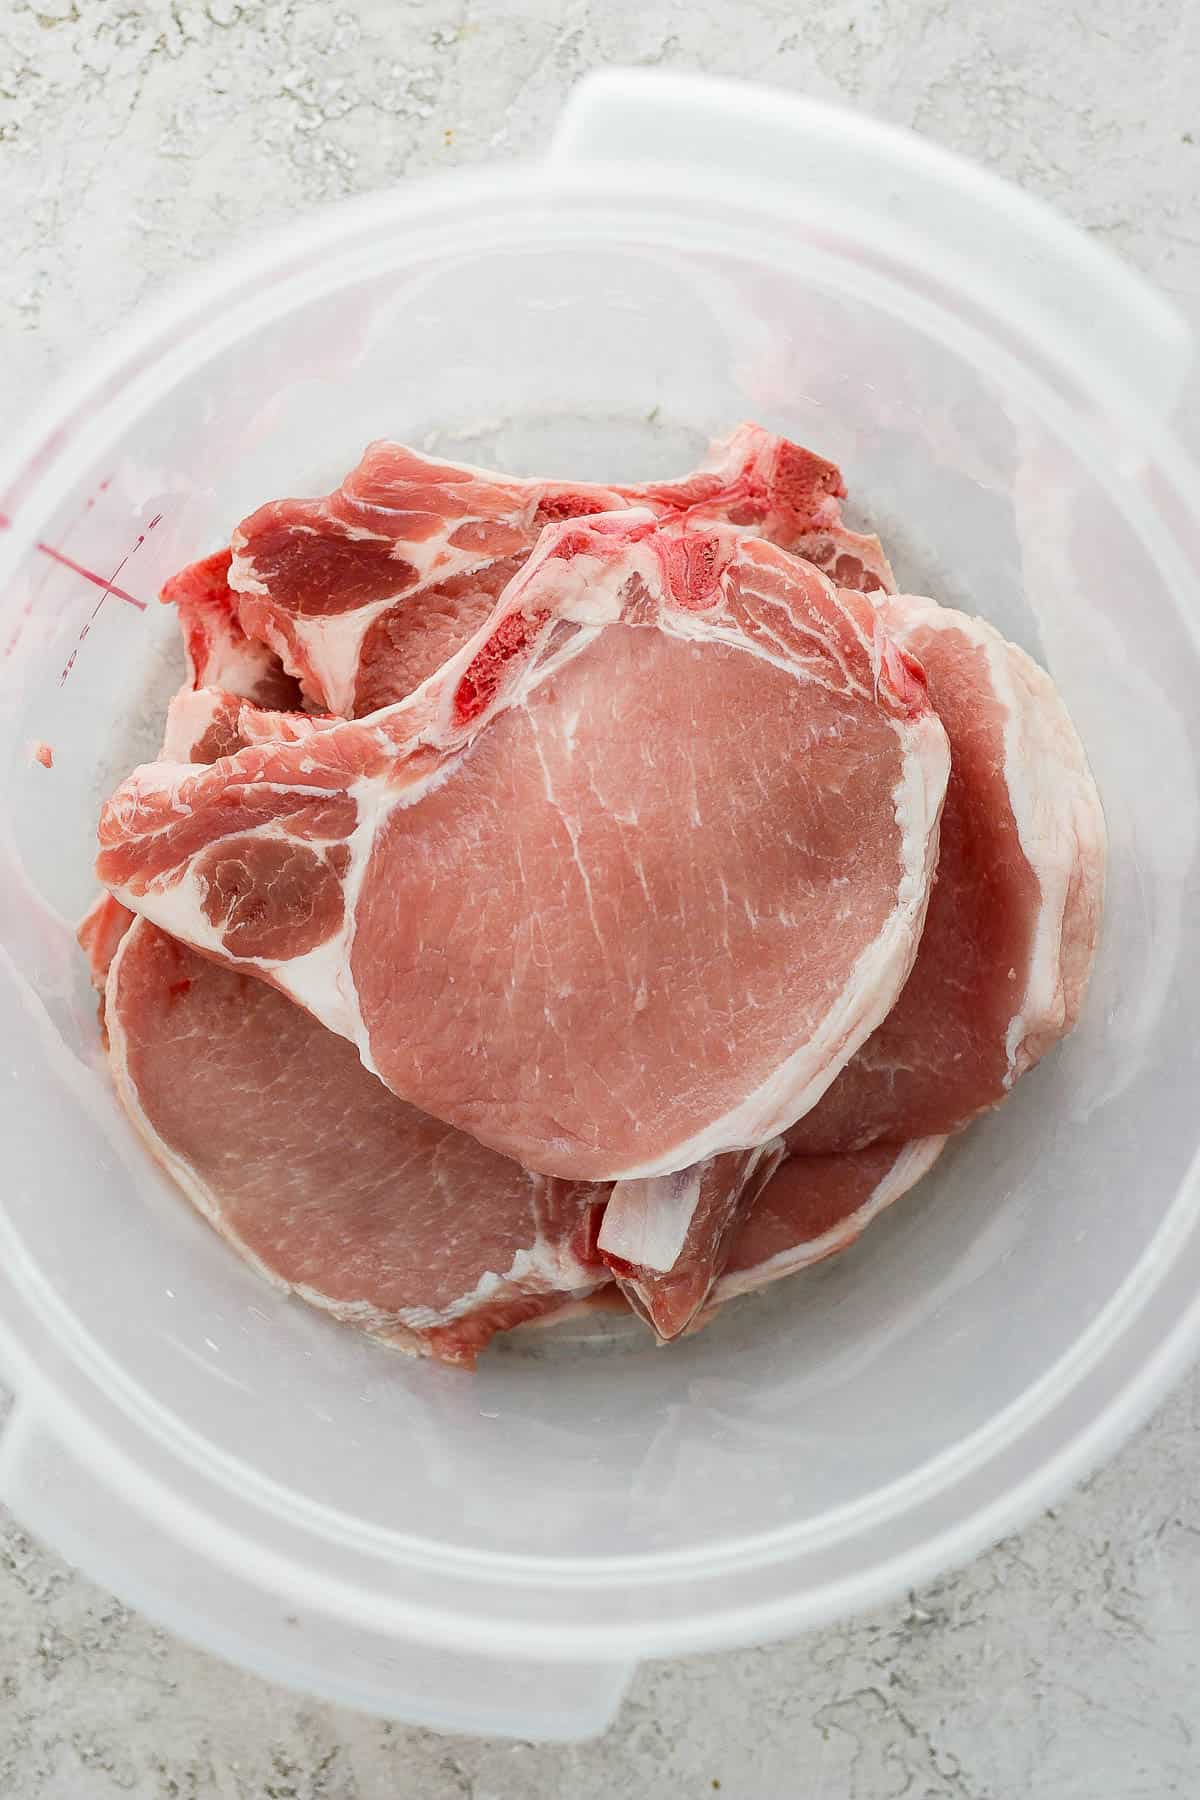 Pork chops in a food safe container.